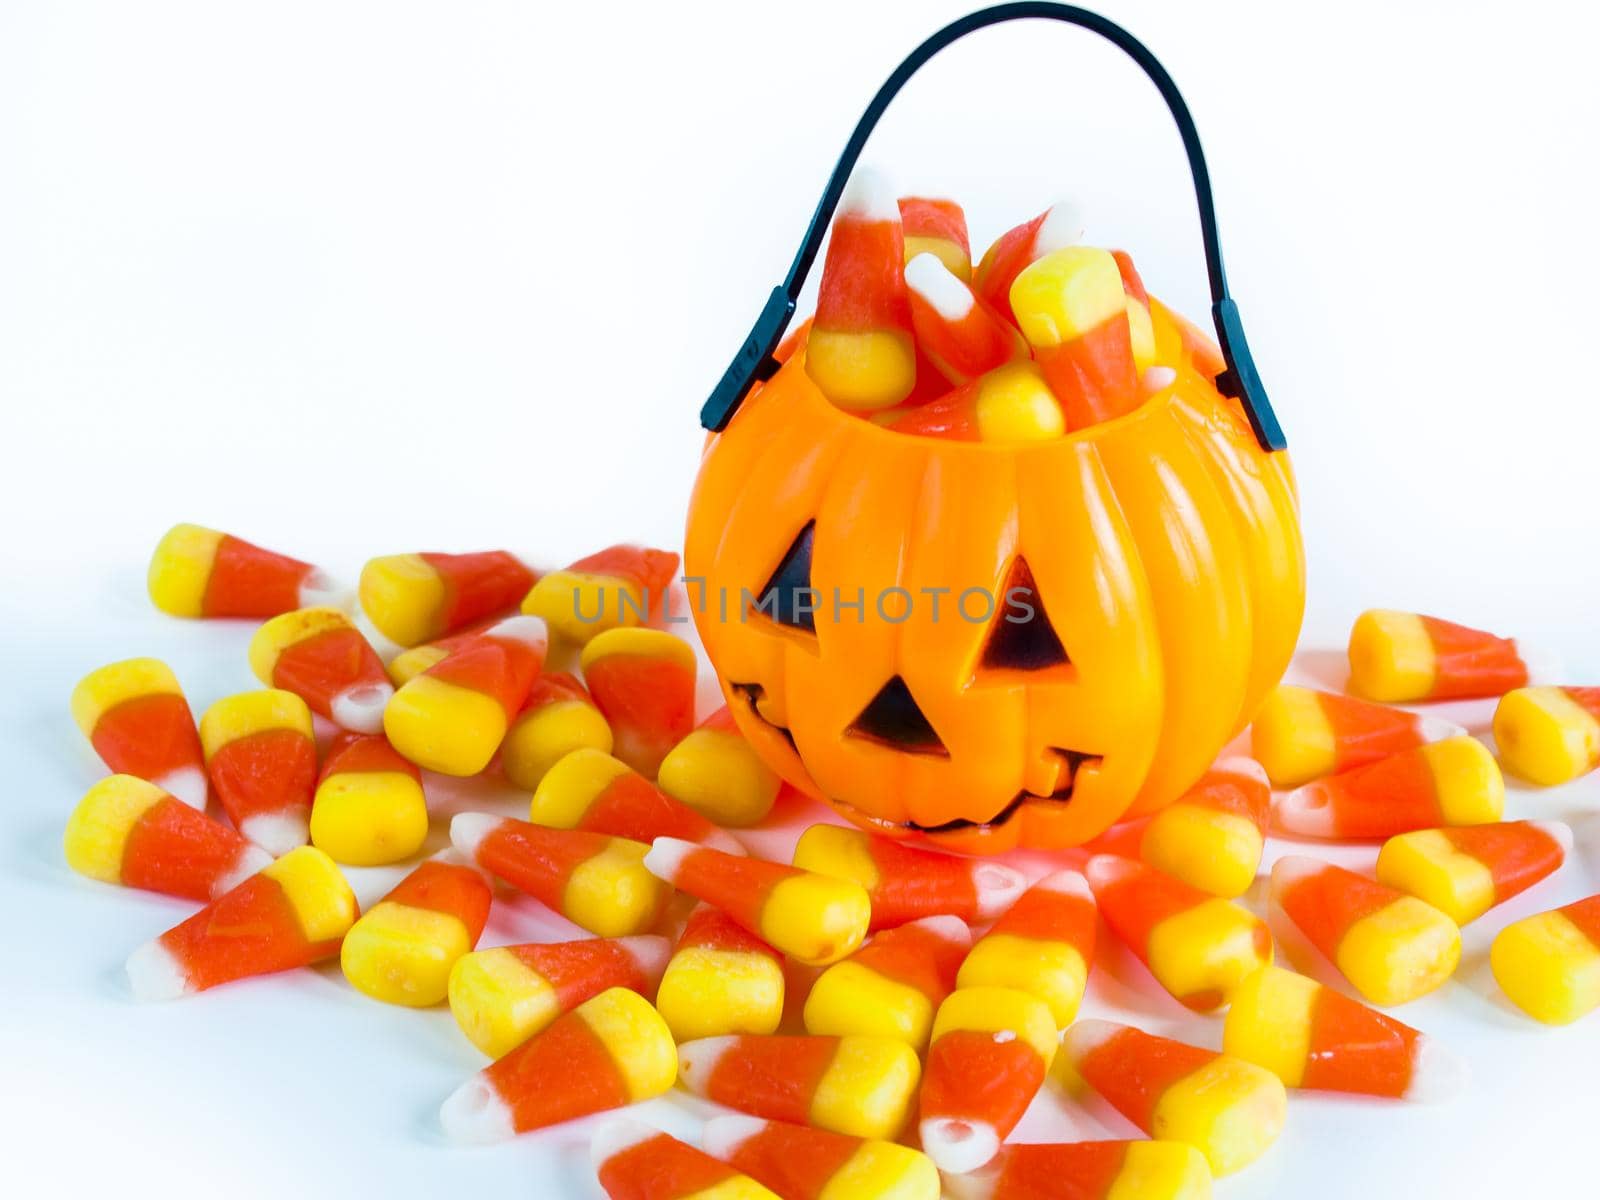 Halloween treat bag filled with candy corn candies on white background.